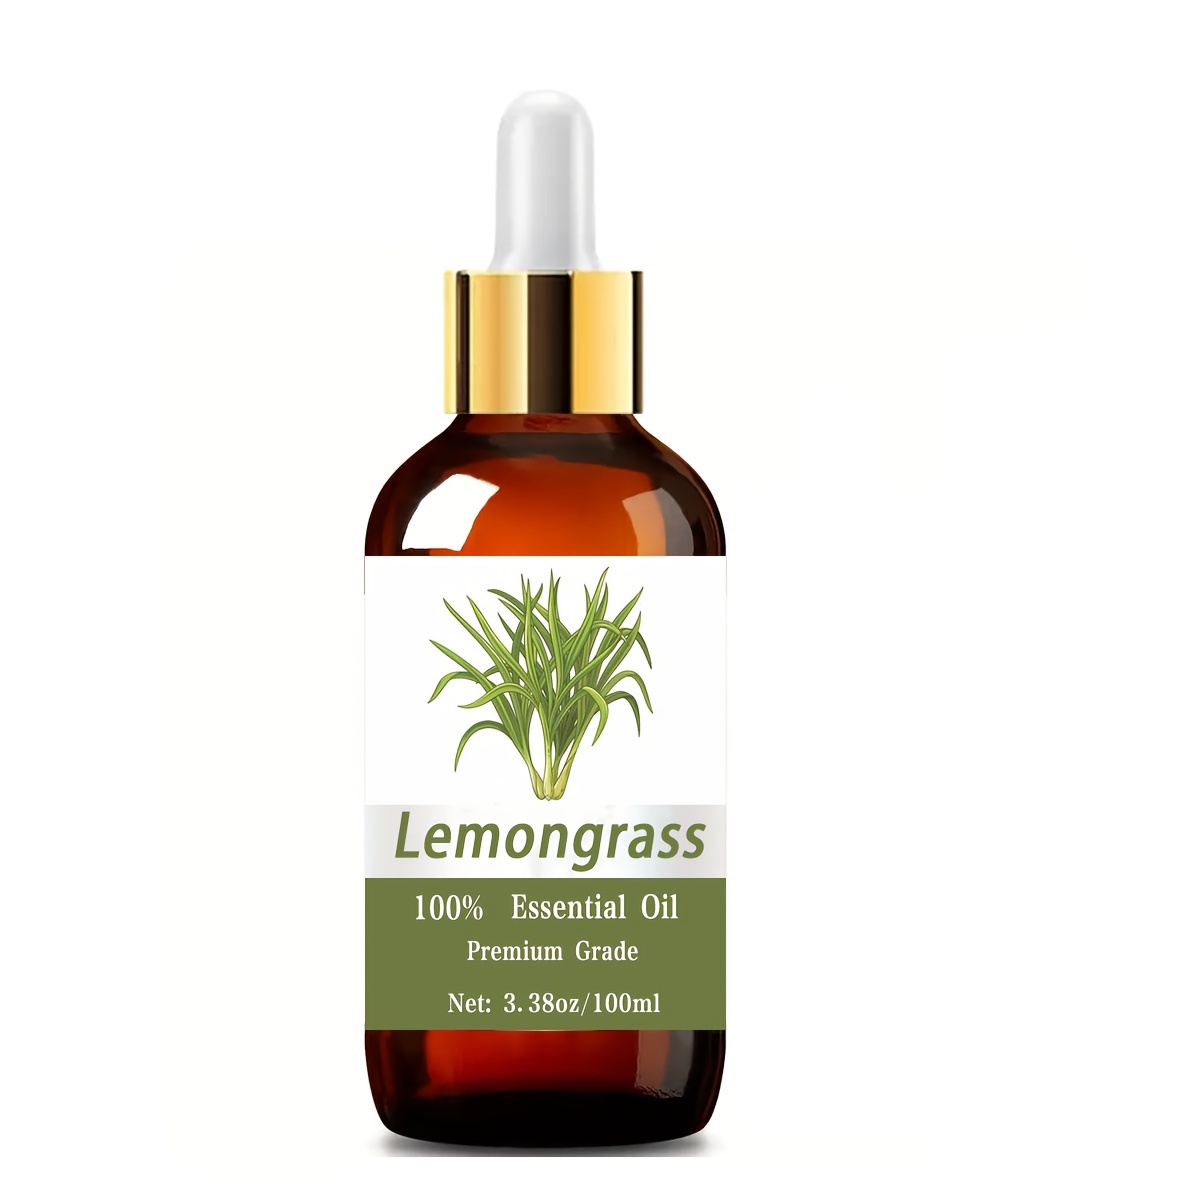 Lemongrass Essential Oil, 3.38oz(100ml), 100% Pure Care Grade For Hair & Skin Care, Massage, Diffusers Humidifier, Moisturizing Massage Essential Oil